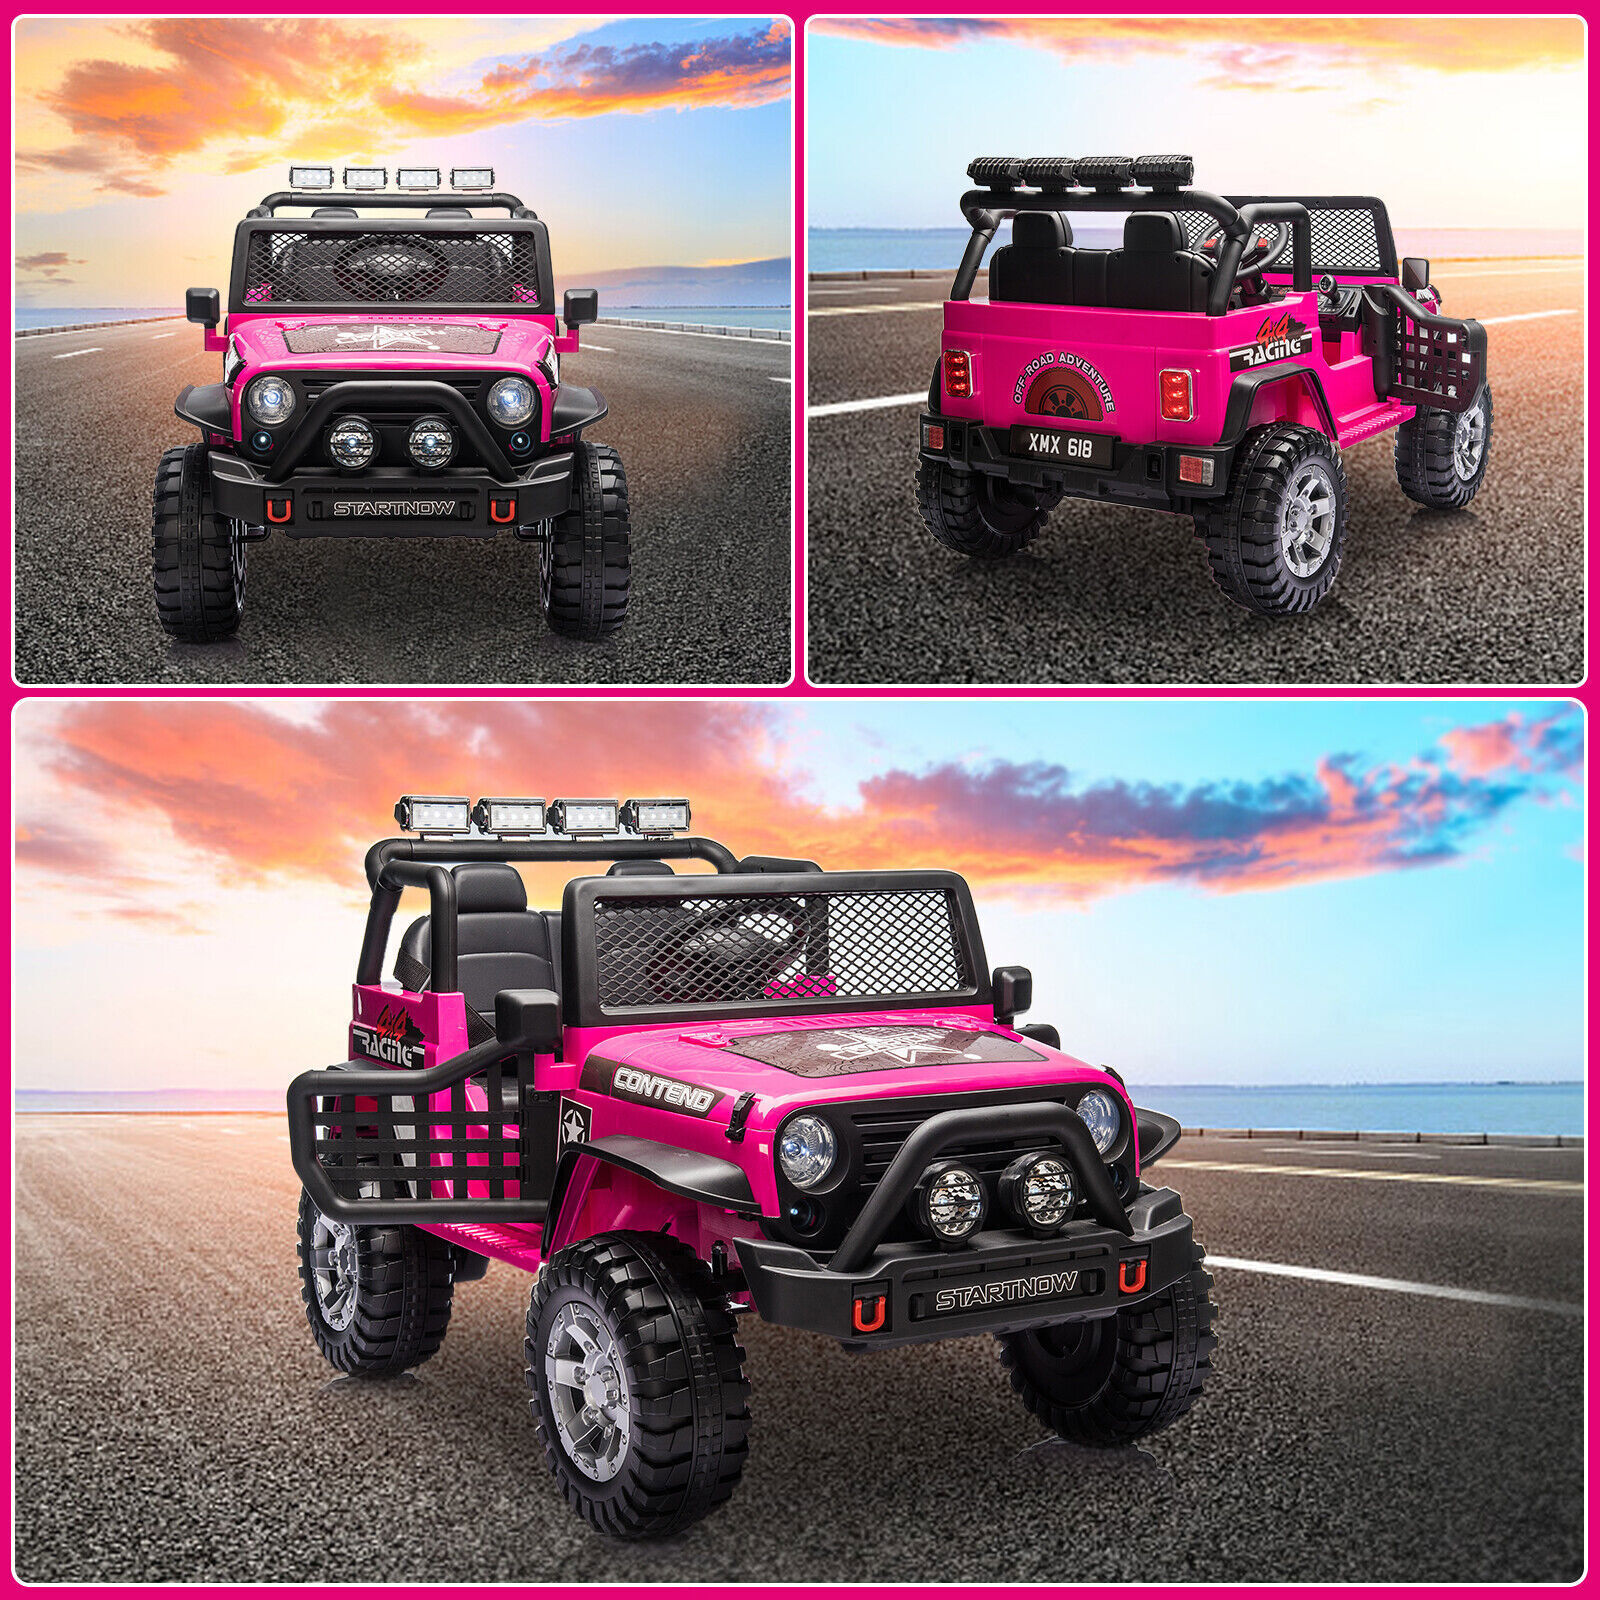 Dazone 12V Kids Ride on Jeep Car, Electric 2 Seats Off-road Jeep Ride on Truck Vehicle with Remote Control, LED Lights, MP3 Music, Pink - image 4 of 8